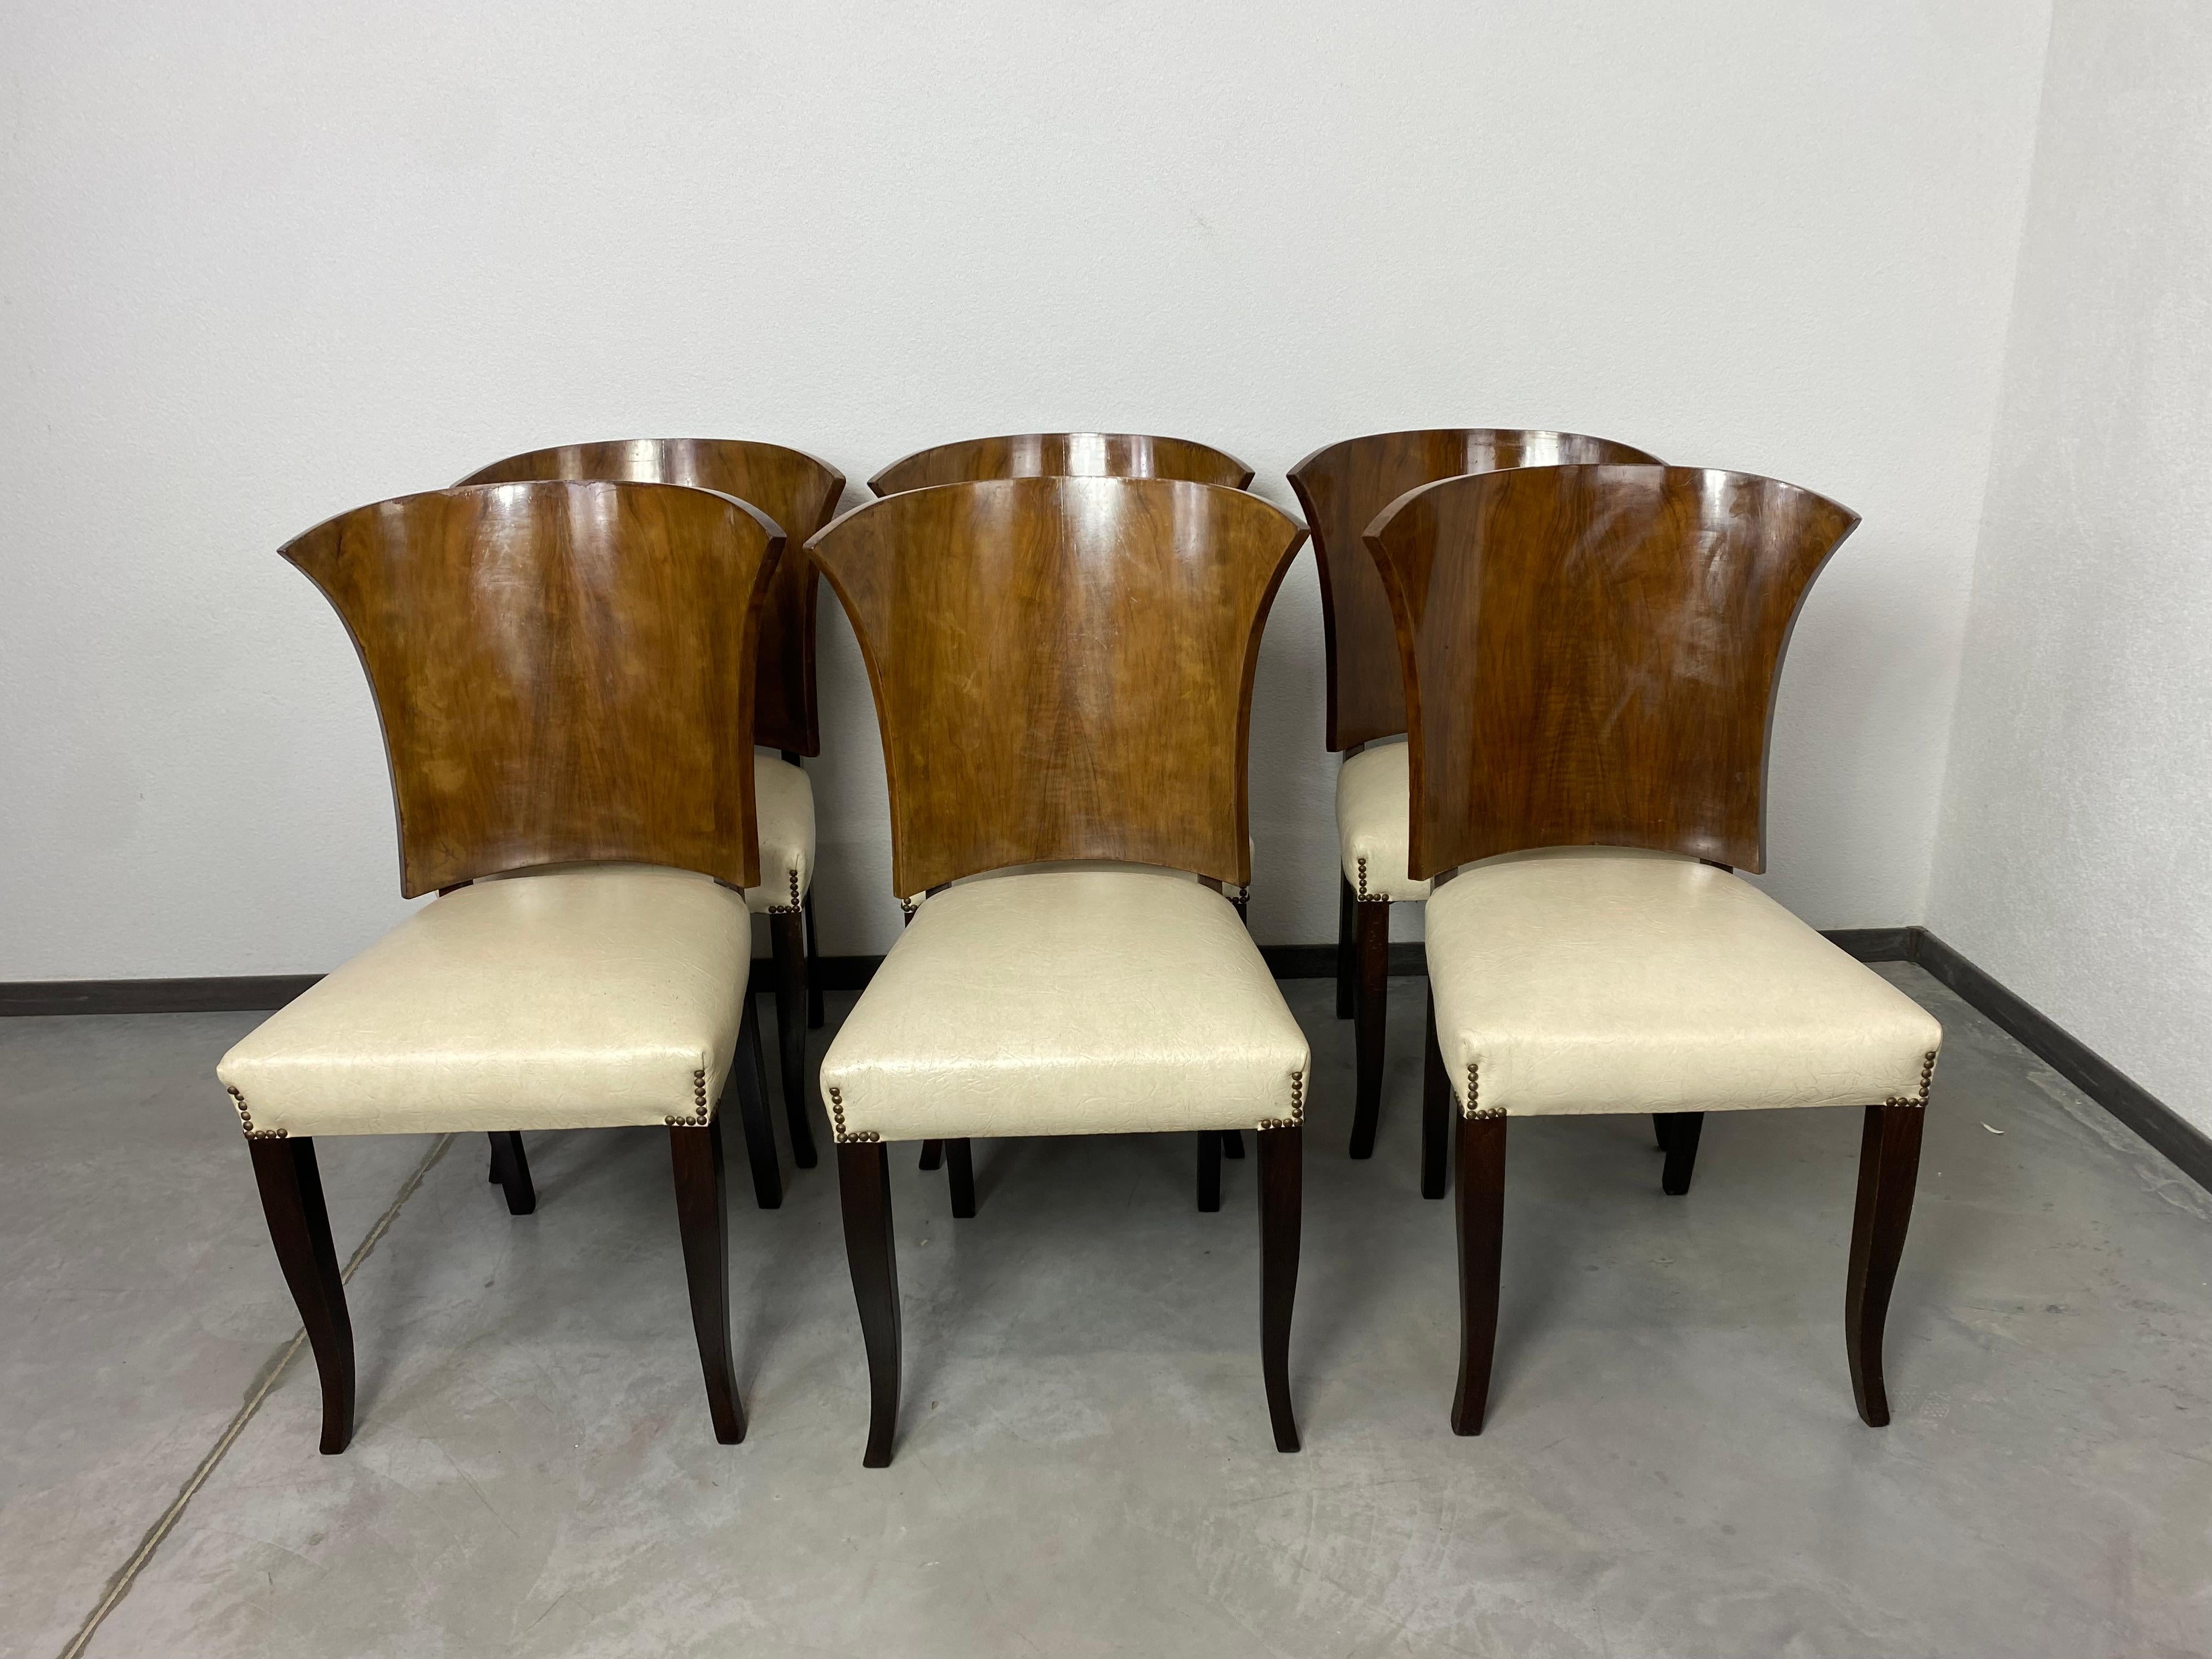 Set of 6 large art deco dining chairs from France in original vintage condition with signs of use. Walnut well designed backrest, white leather seats.